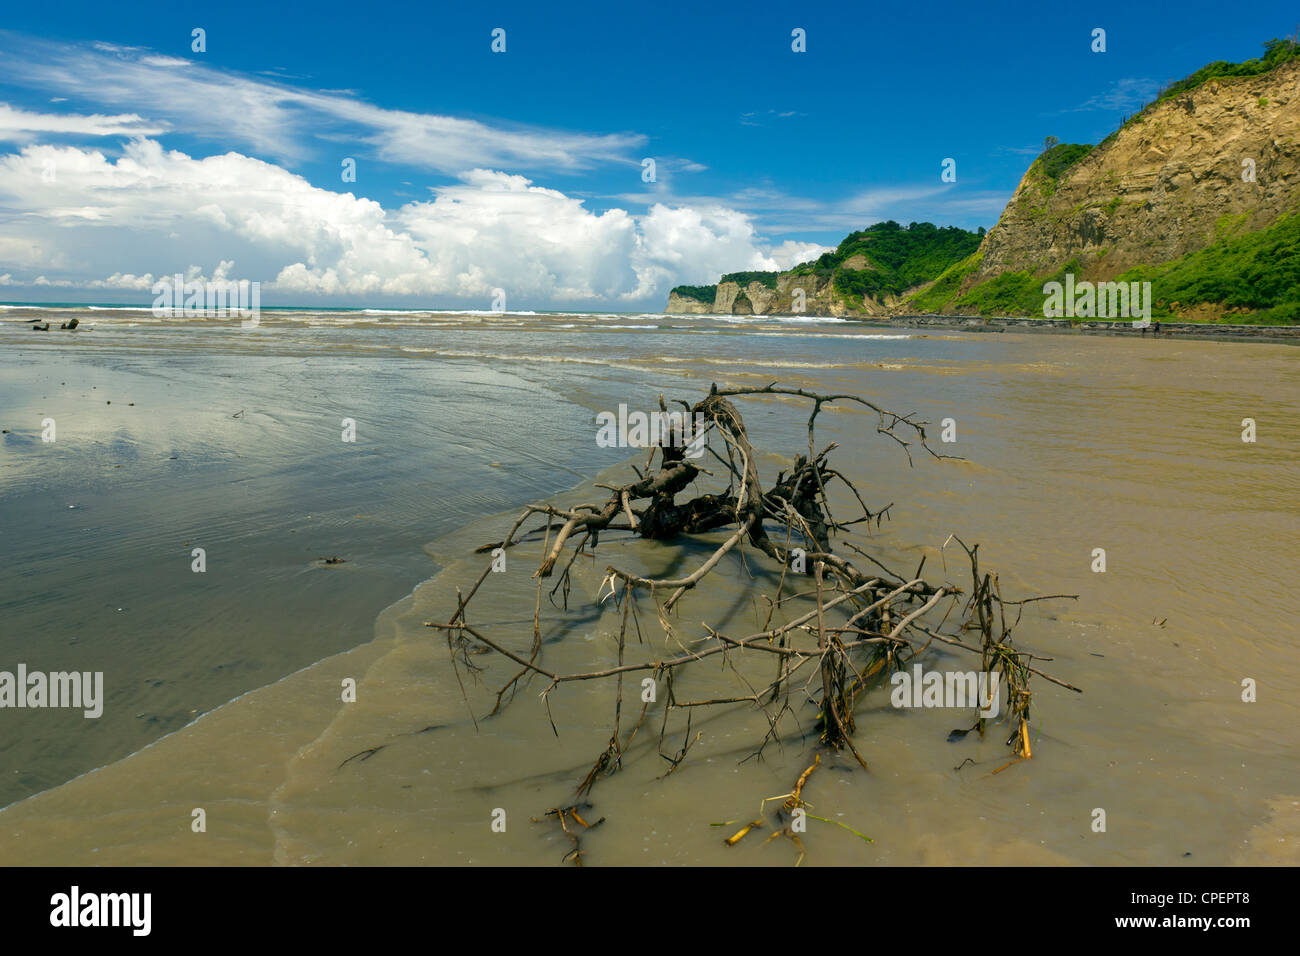 Tropical beach on the Pacific coast of Ecuador during a very severe wet season with brown floodwater in foreground Stock Photo